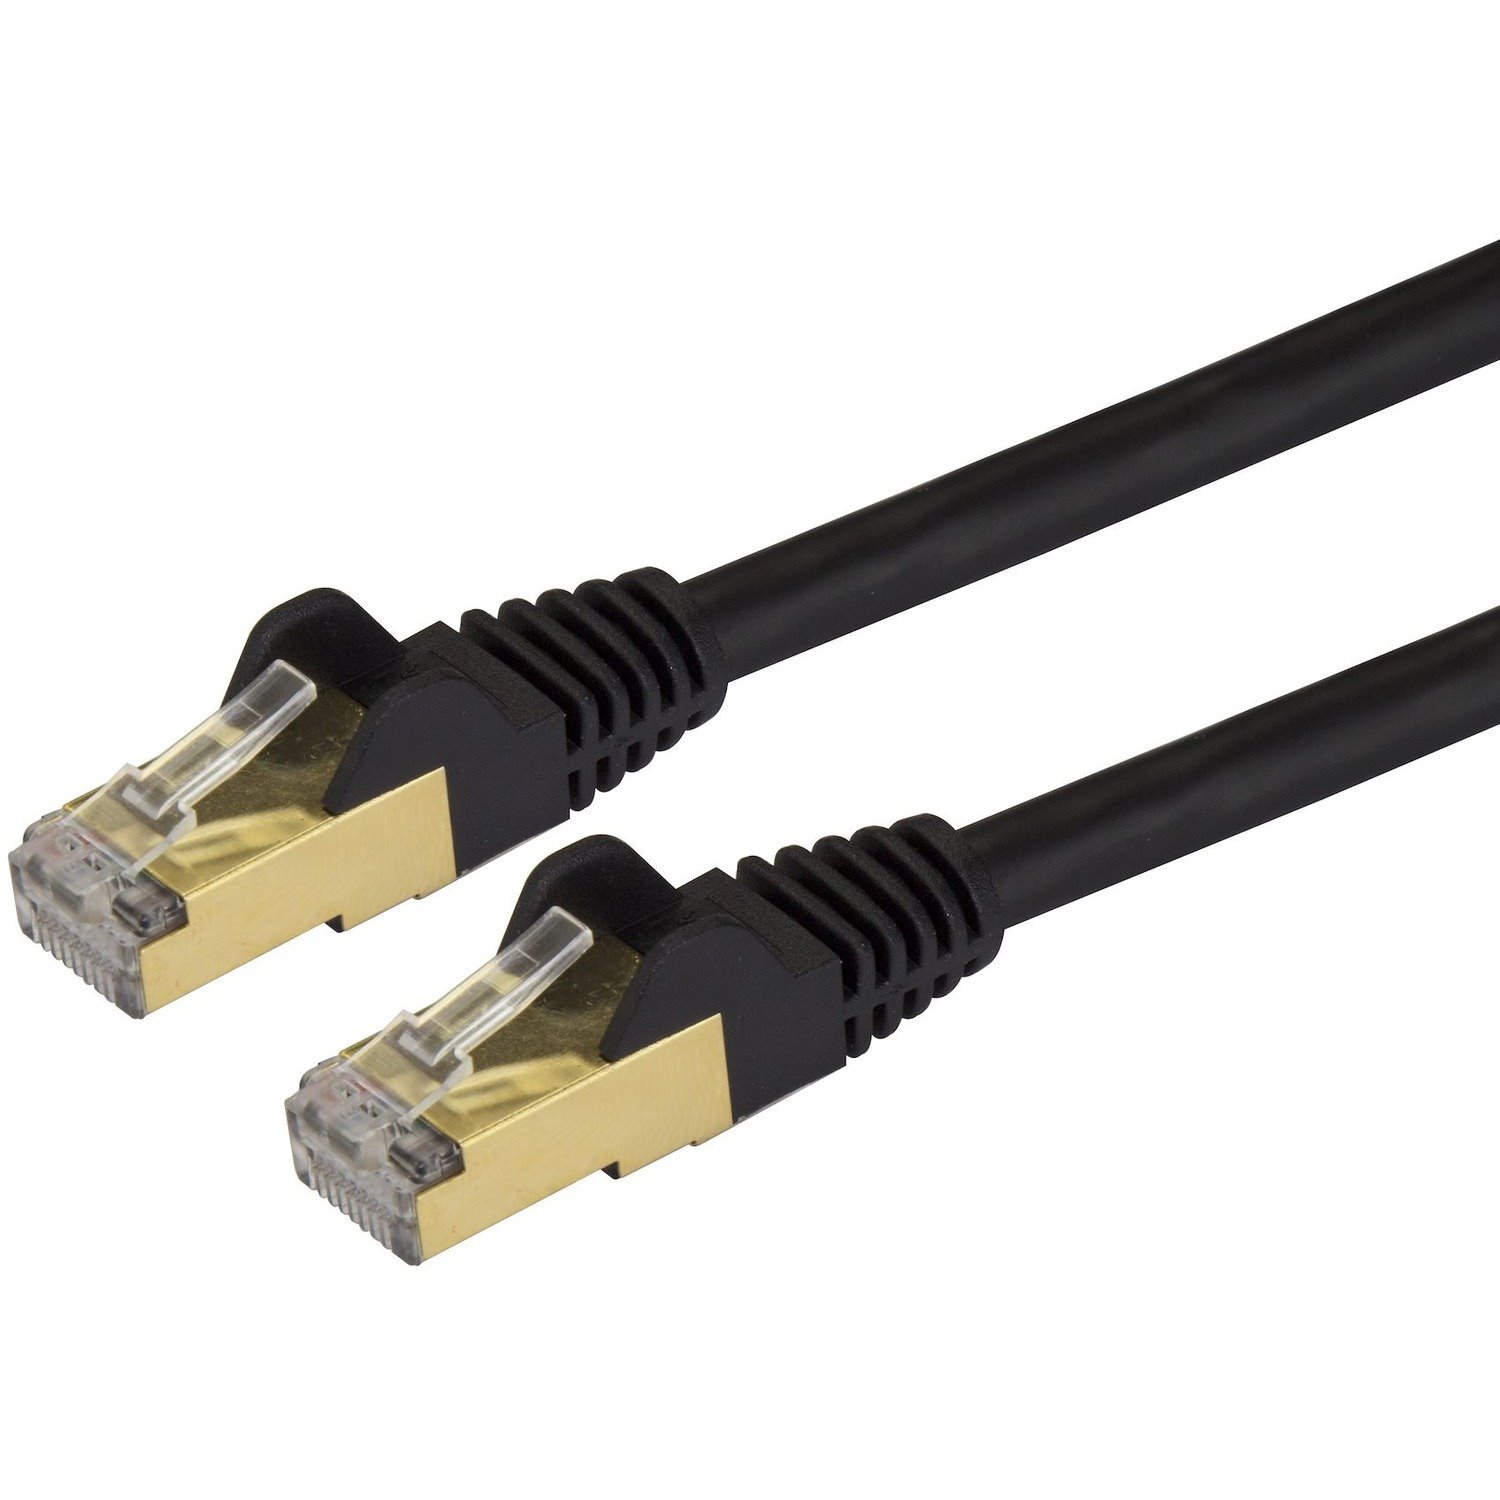 StarTech.com 4.27 m Category 6a Network Cable for Docking Station, Network Device, Notebook, Desktop Computer, Hub, Switch, Router, Print Server, Patch Panel, PoE-enabled Device, VoIP Device - 1